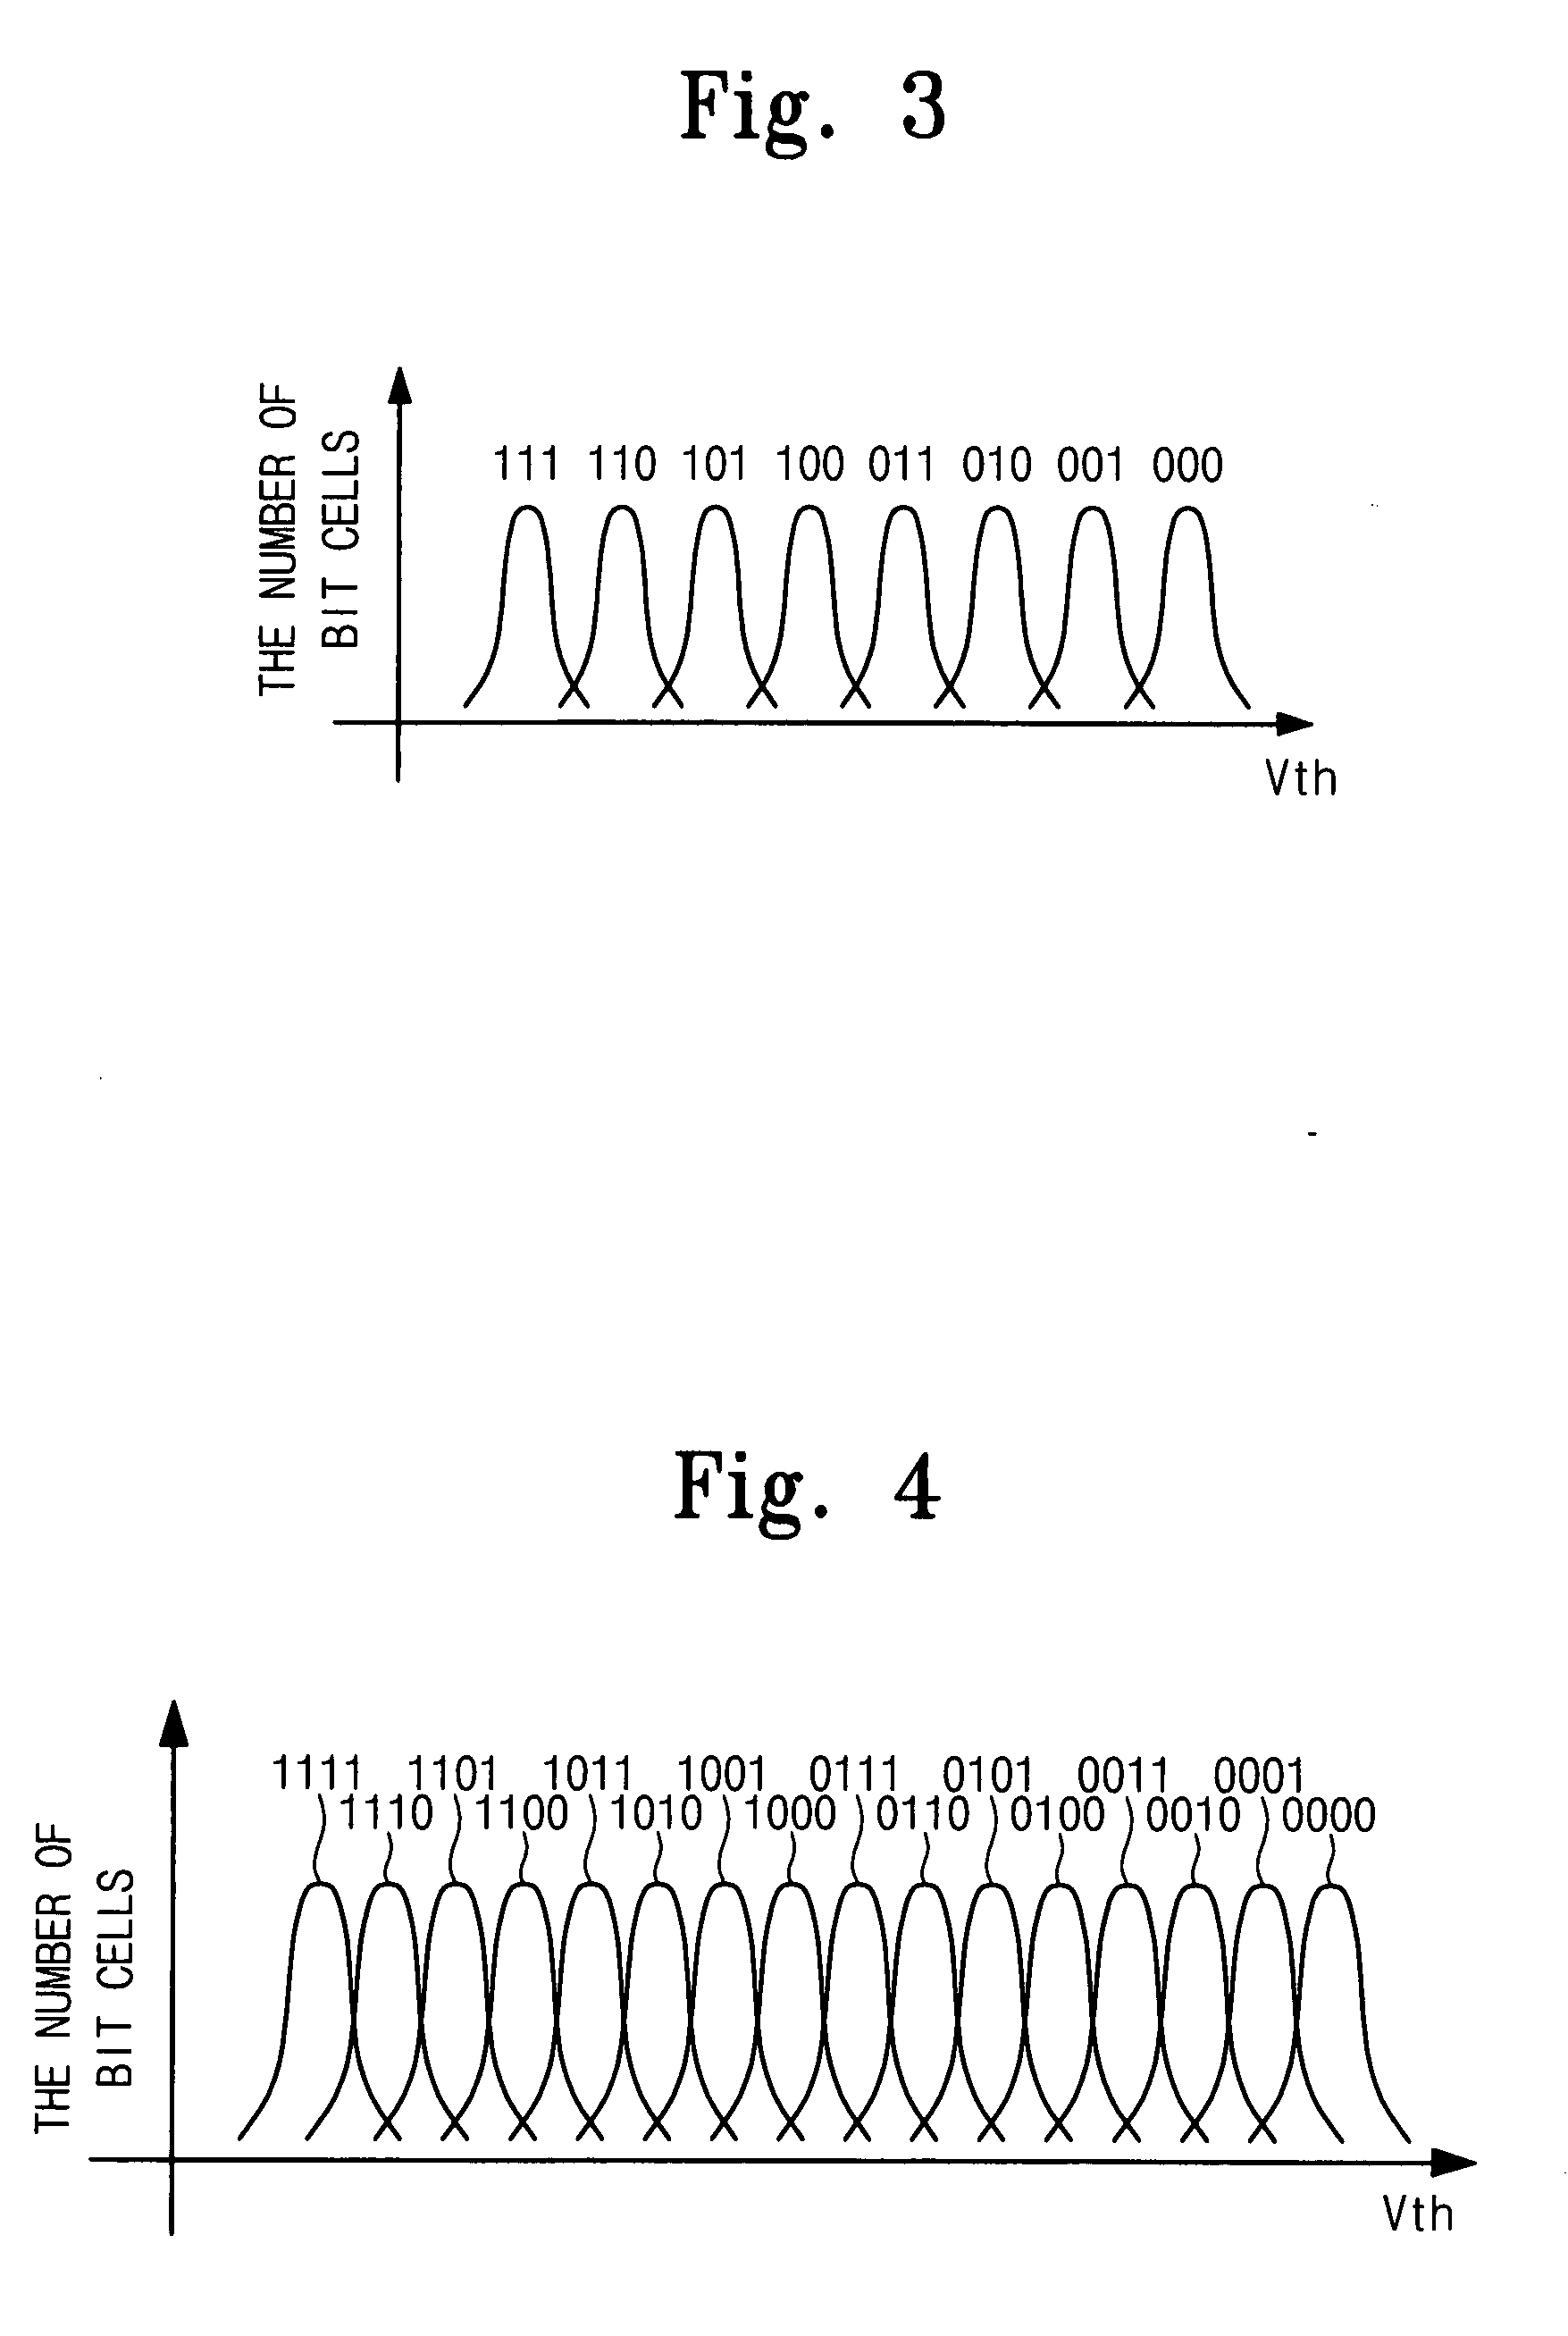 ECC controller for use in flash memory device and memory system including the same